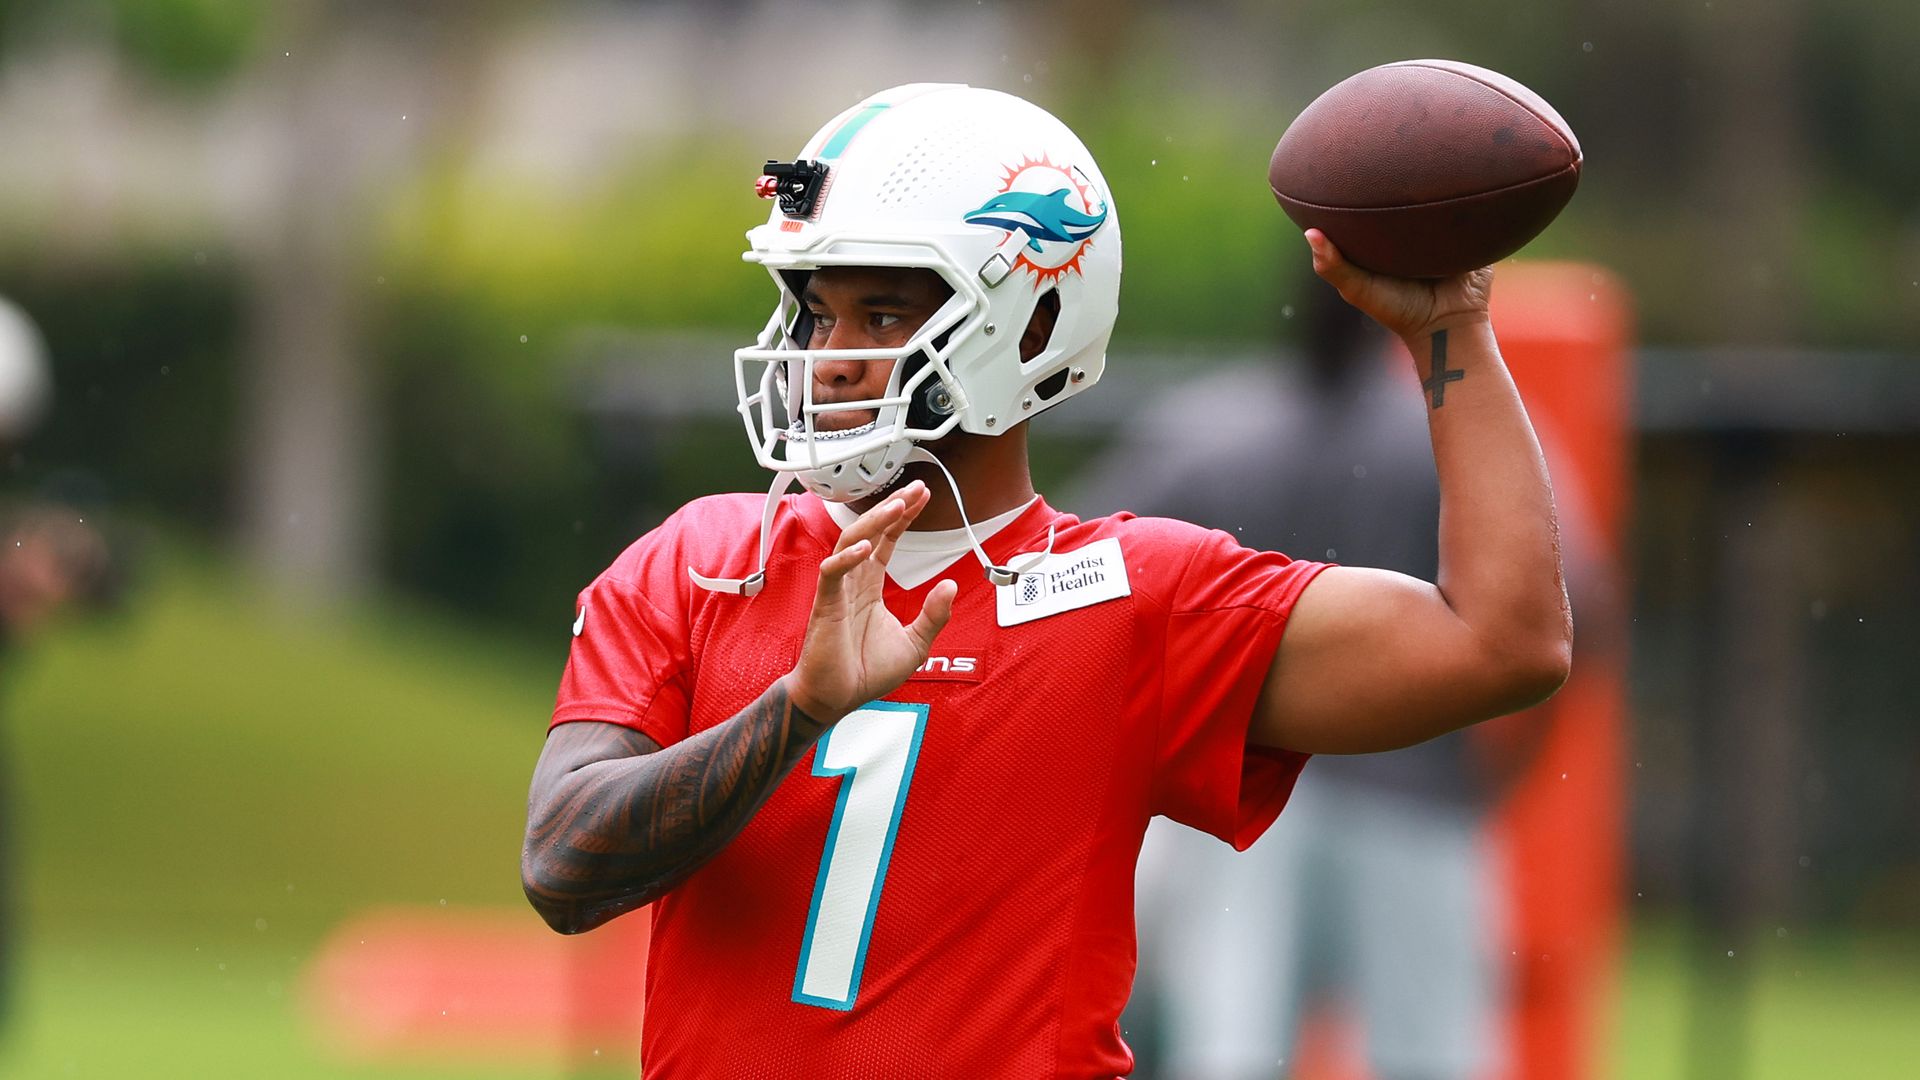 Dolphins ready to make waves: Tua Tagovailoa believes in the Miami